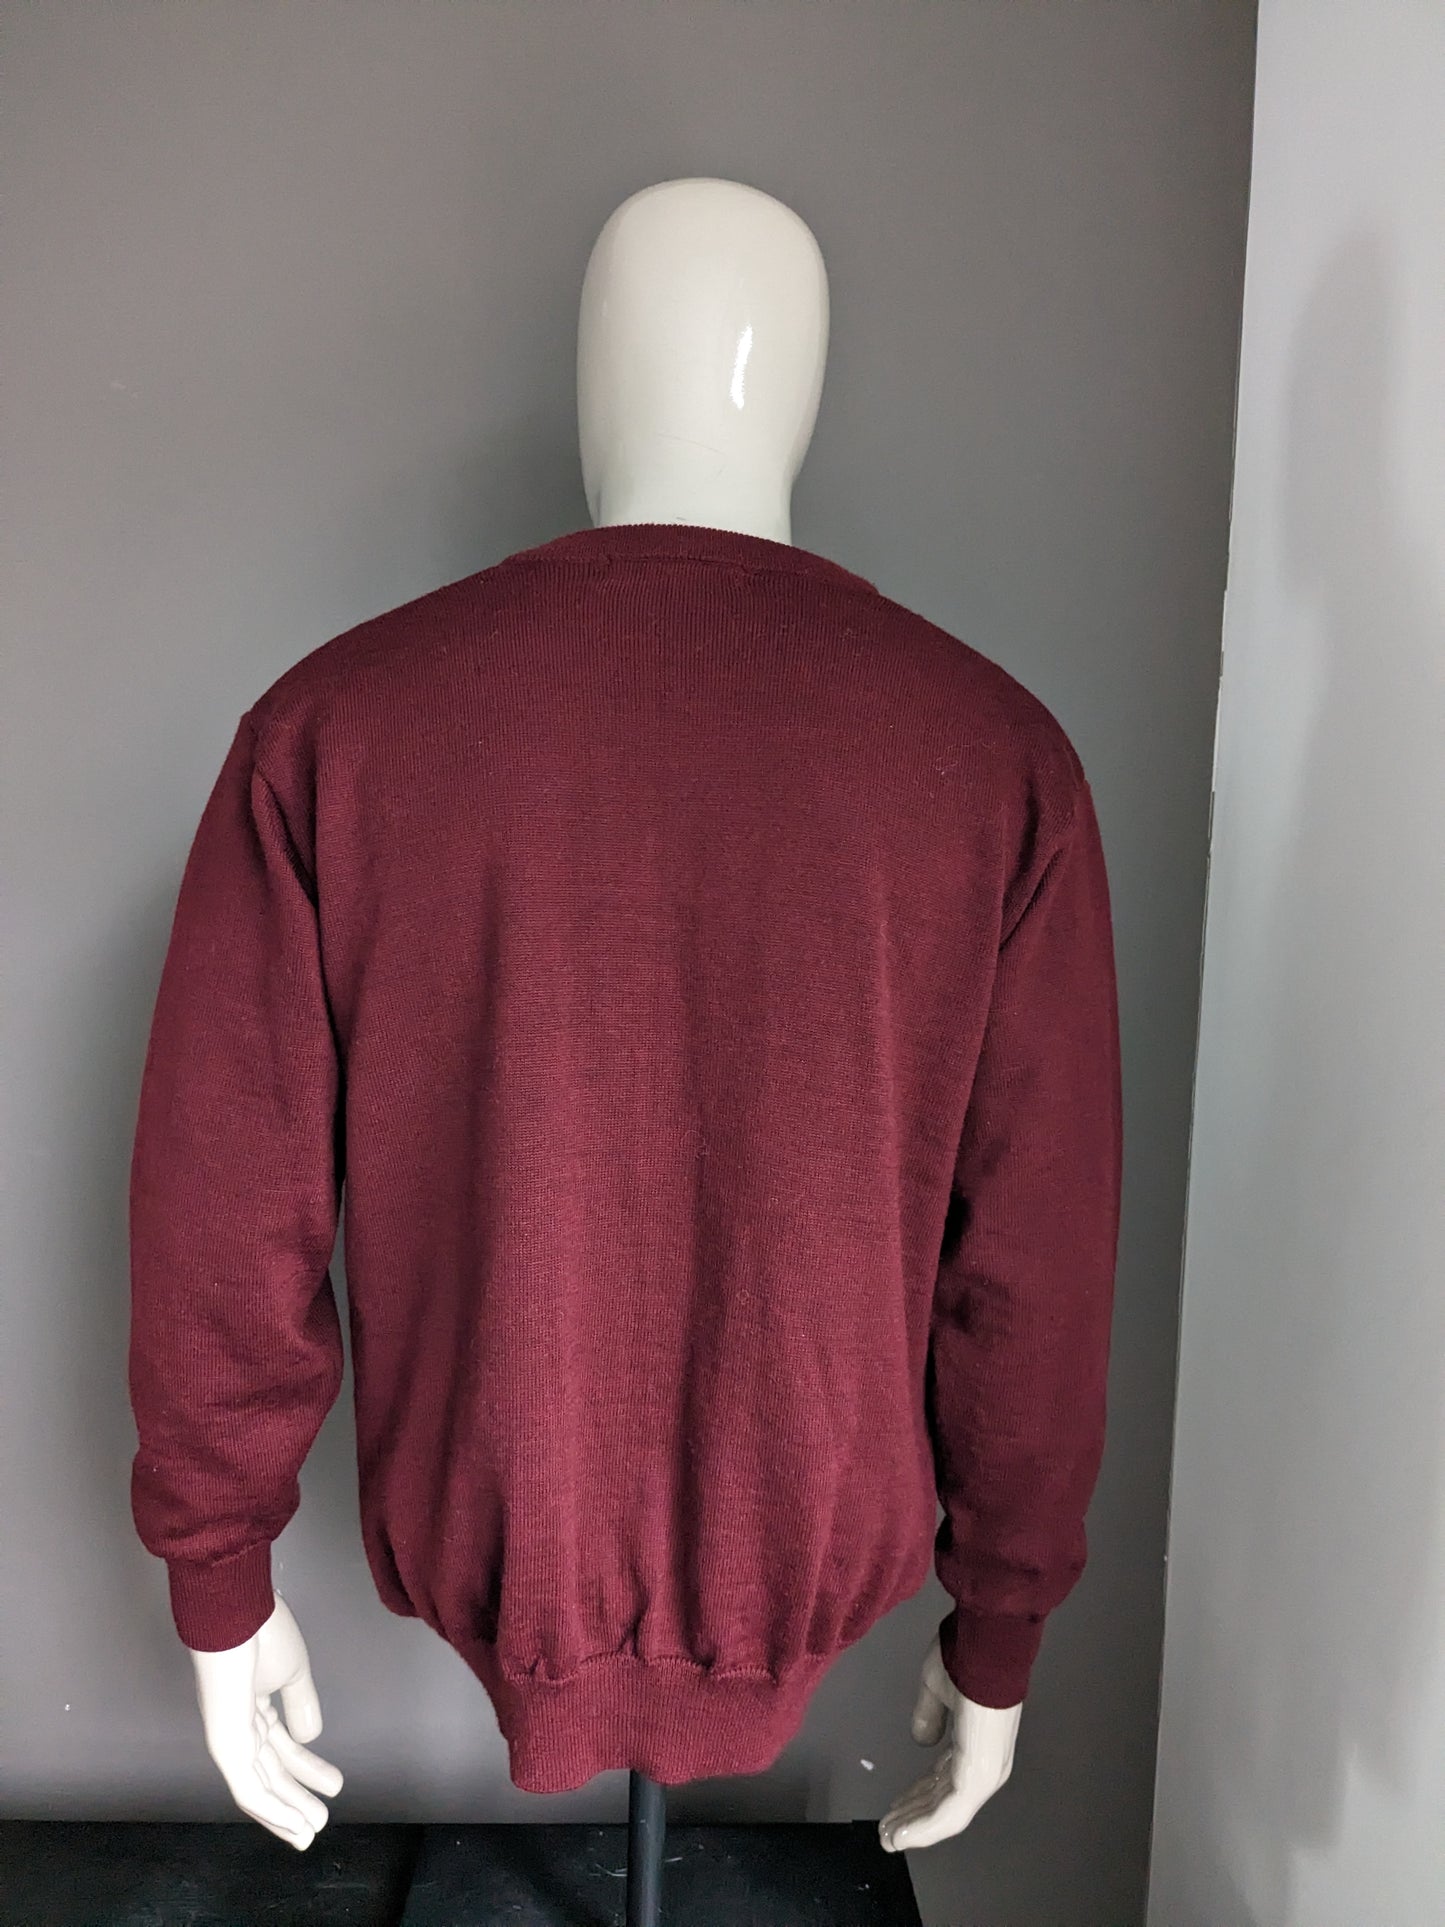 Vintage Carlo premera wool sweater with v-neck. Bordeaux. Size L.